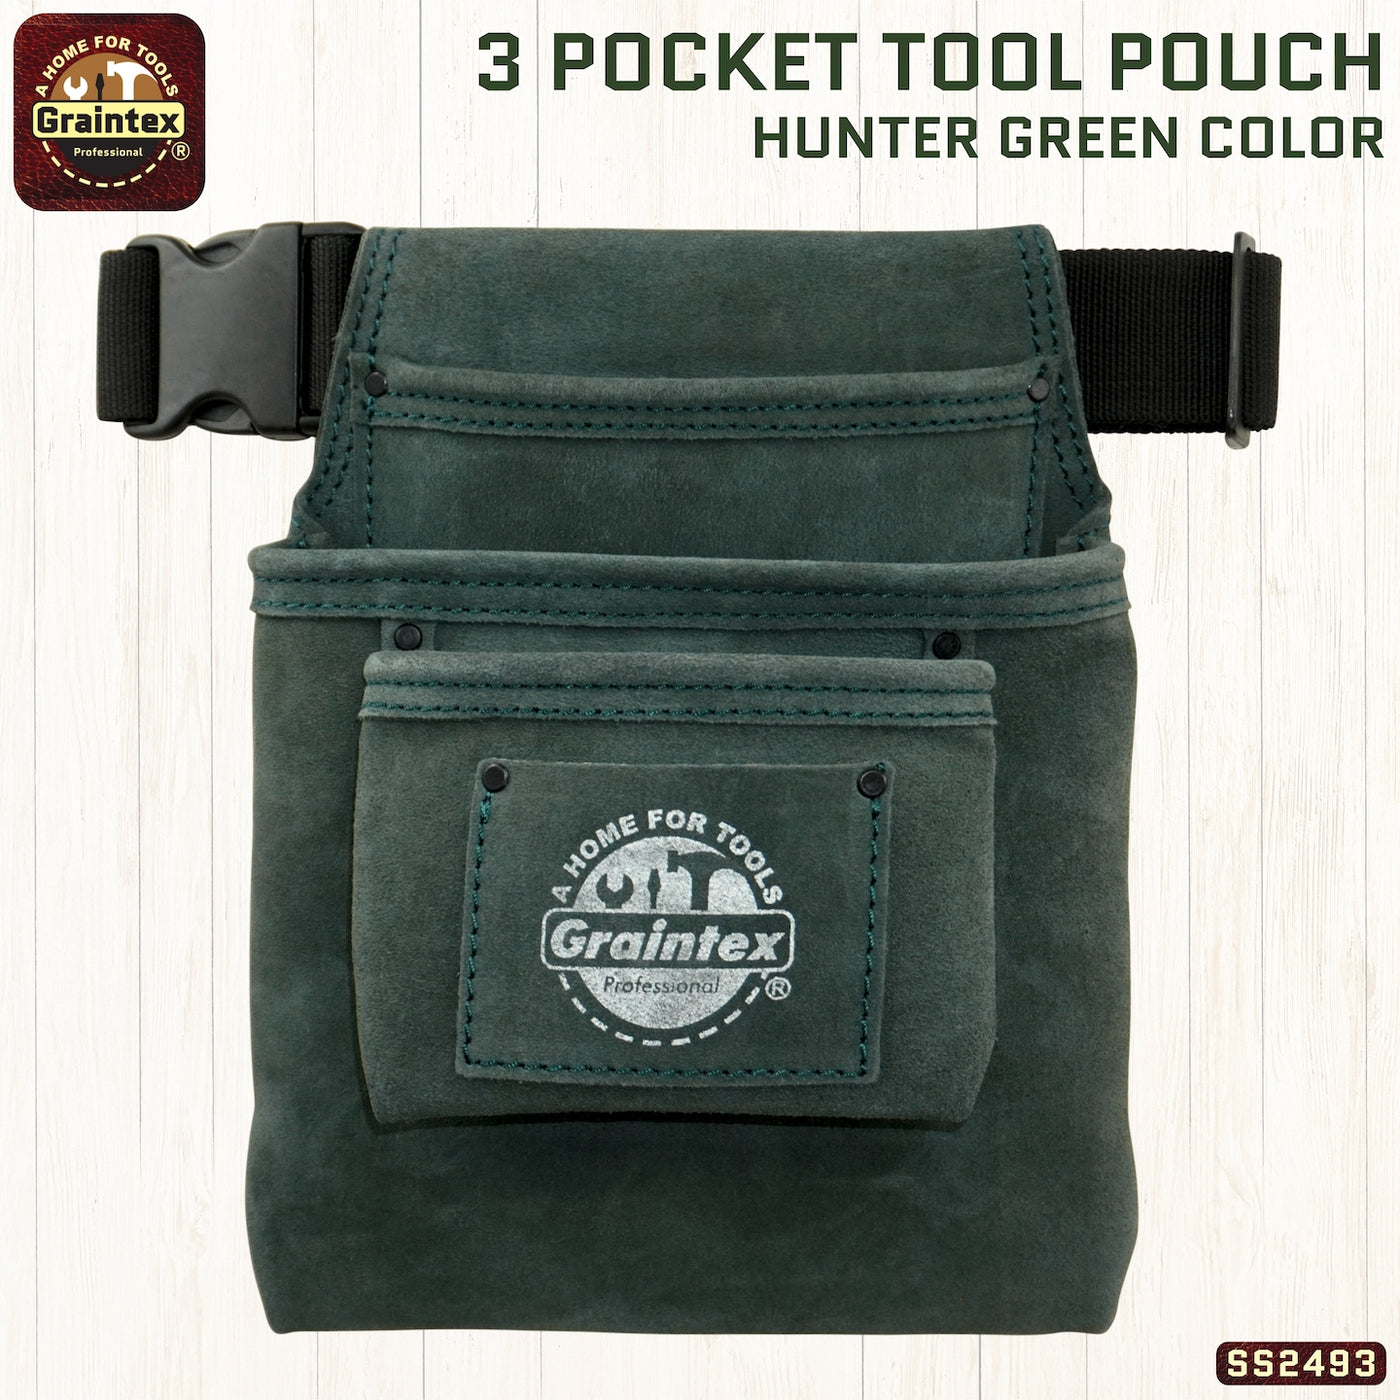 SS2493 :: 3 Pocket Nail & Tool Pouch Hunter Green Color Suede Leather with Belt